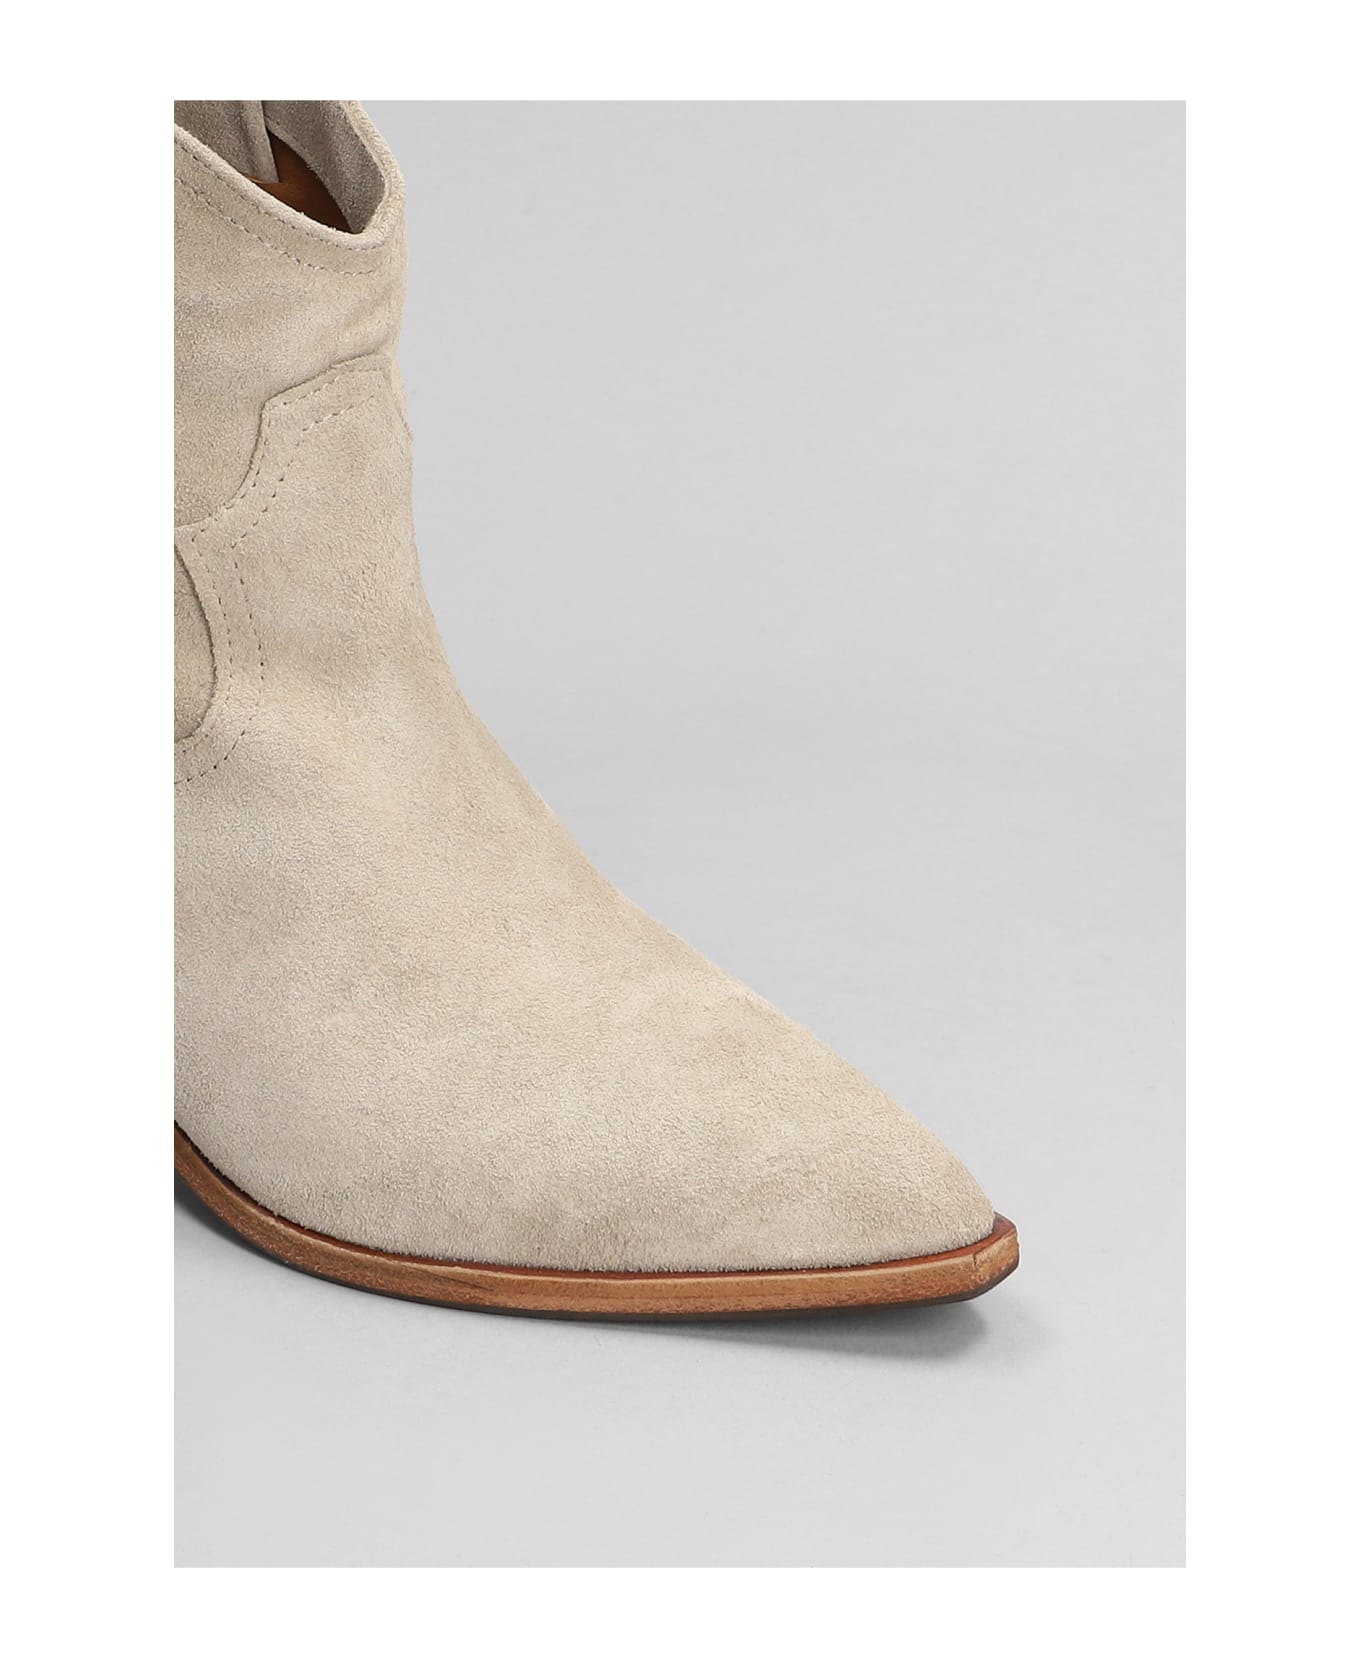 Julie Dee Texan Ankle Boots In Taupe Suede - taupe